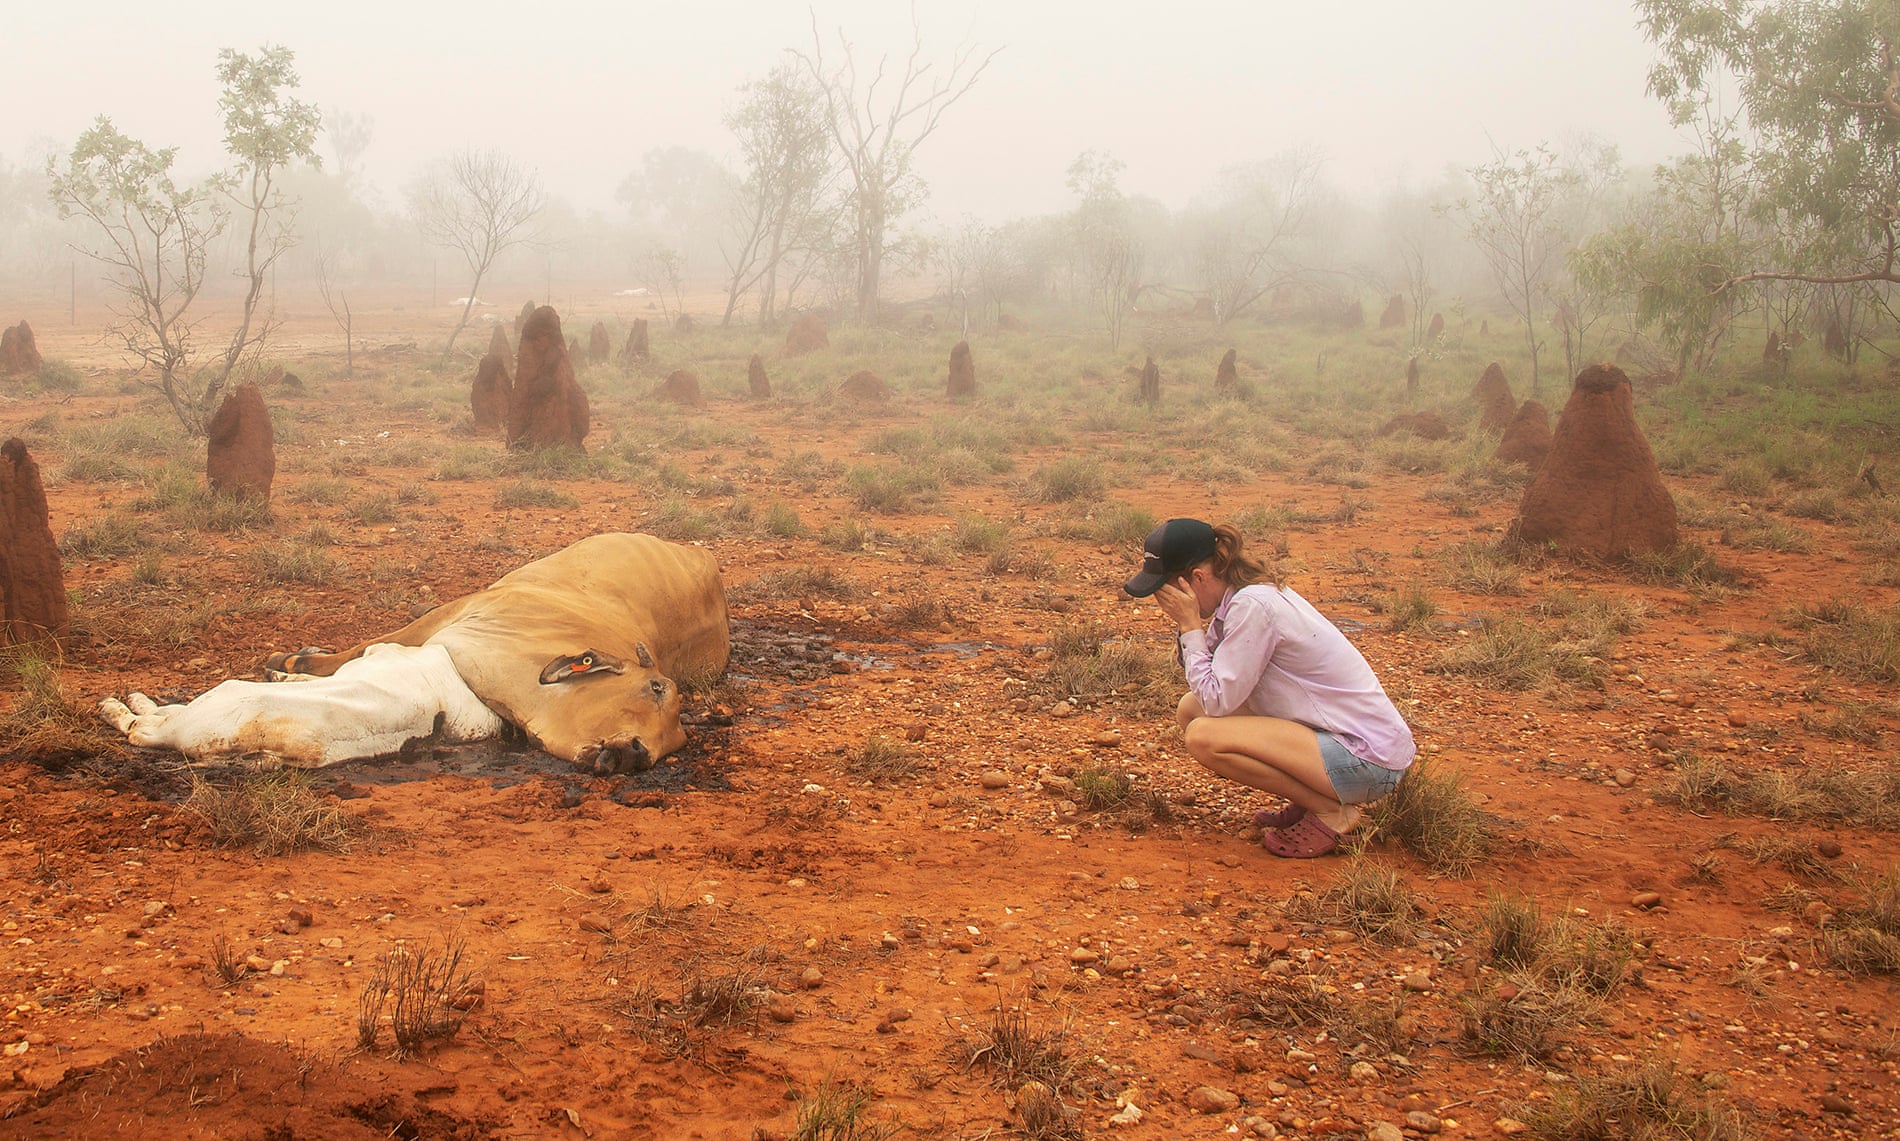 Cattle killed by flood waters in Queensland, Australia in February 2019. Photo by Jacqueline Curley. Handout to Guardian Australia.